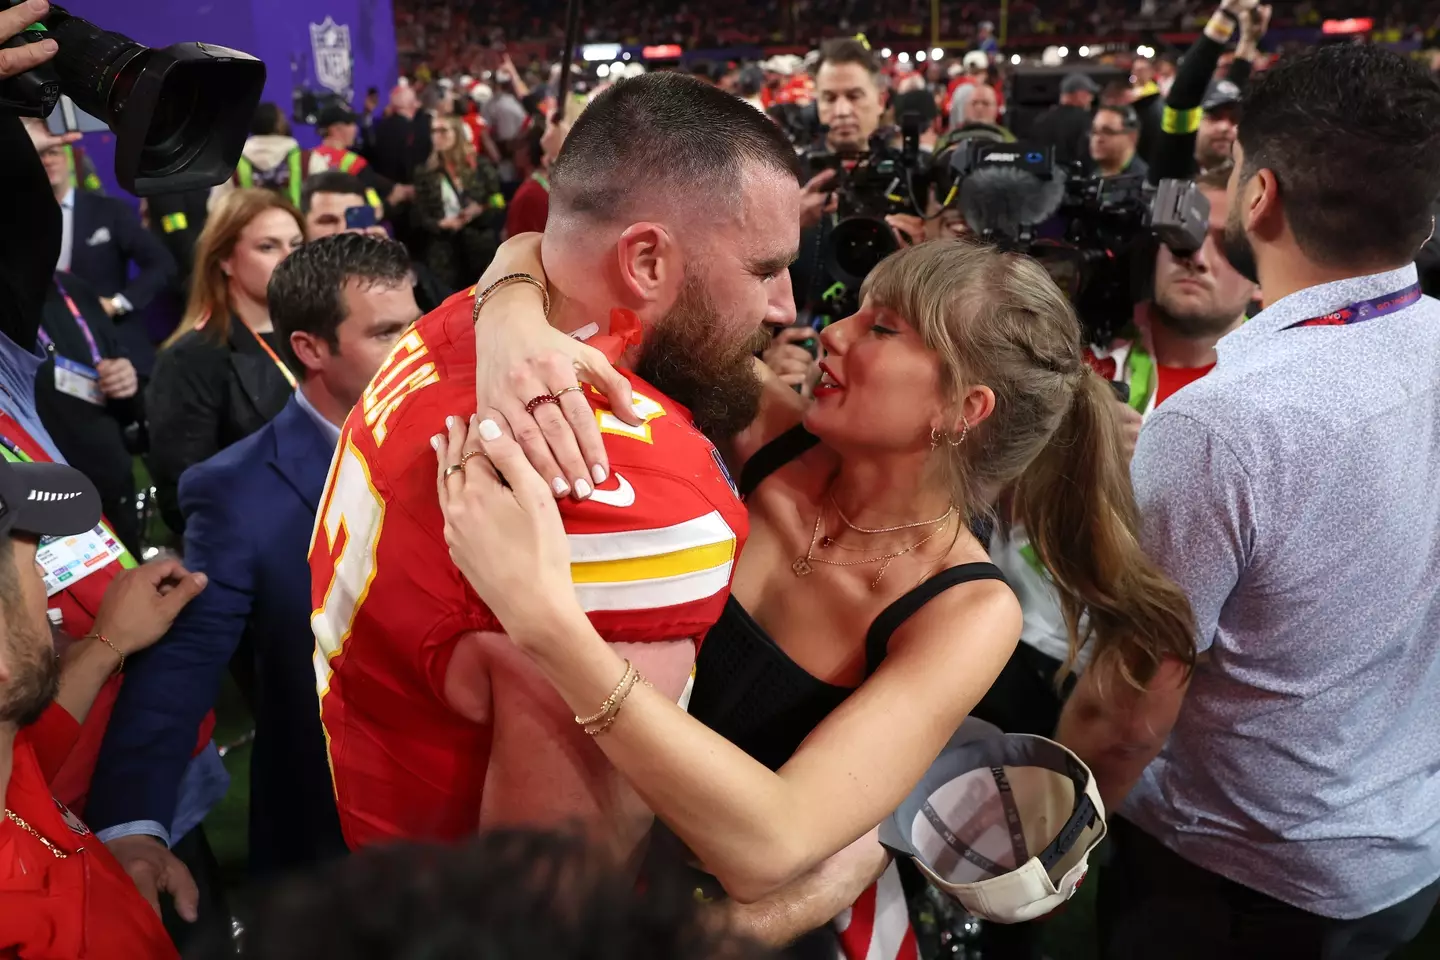 Kelce appeared to wipe tears from his eyes during the performance. (TikTok//@rlknyc)